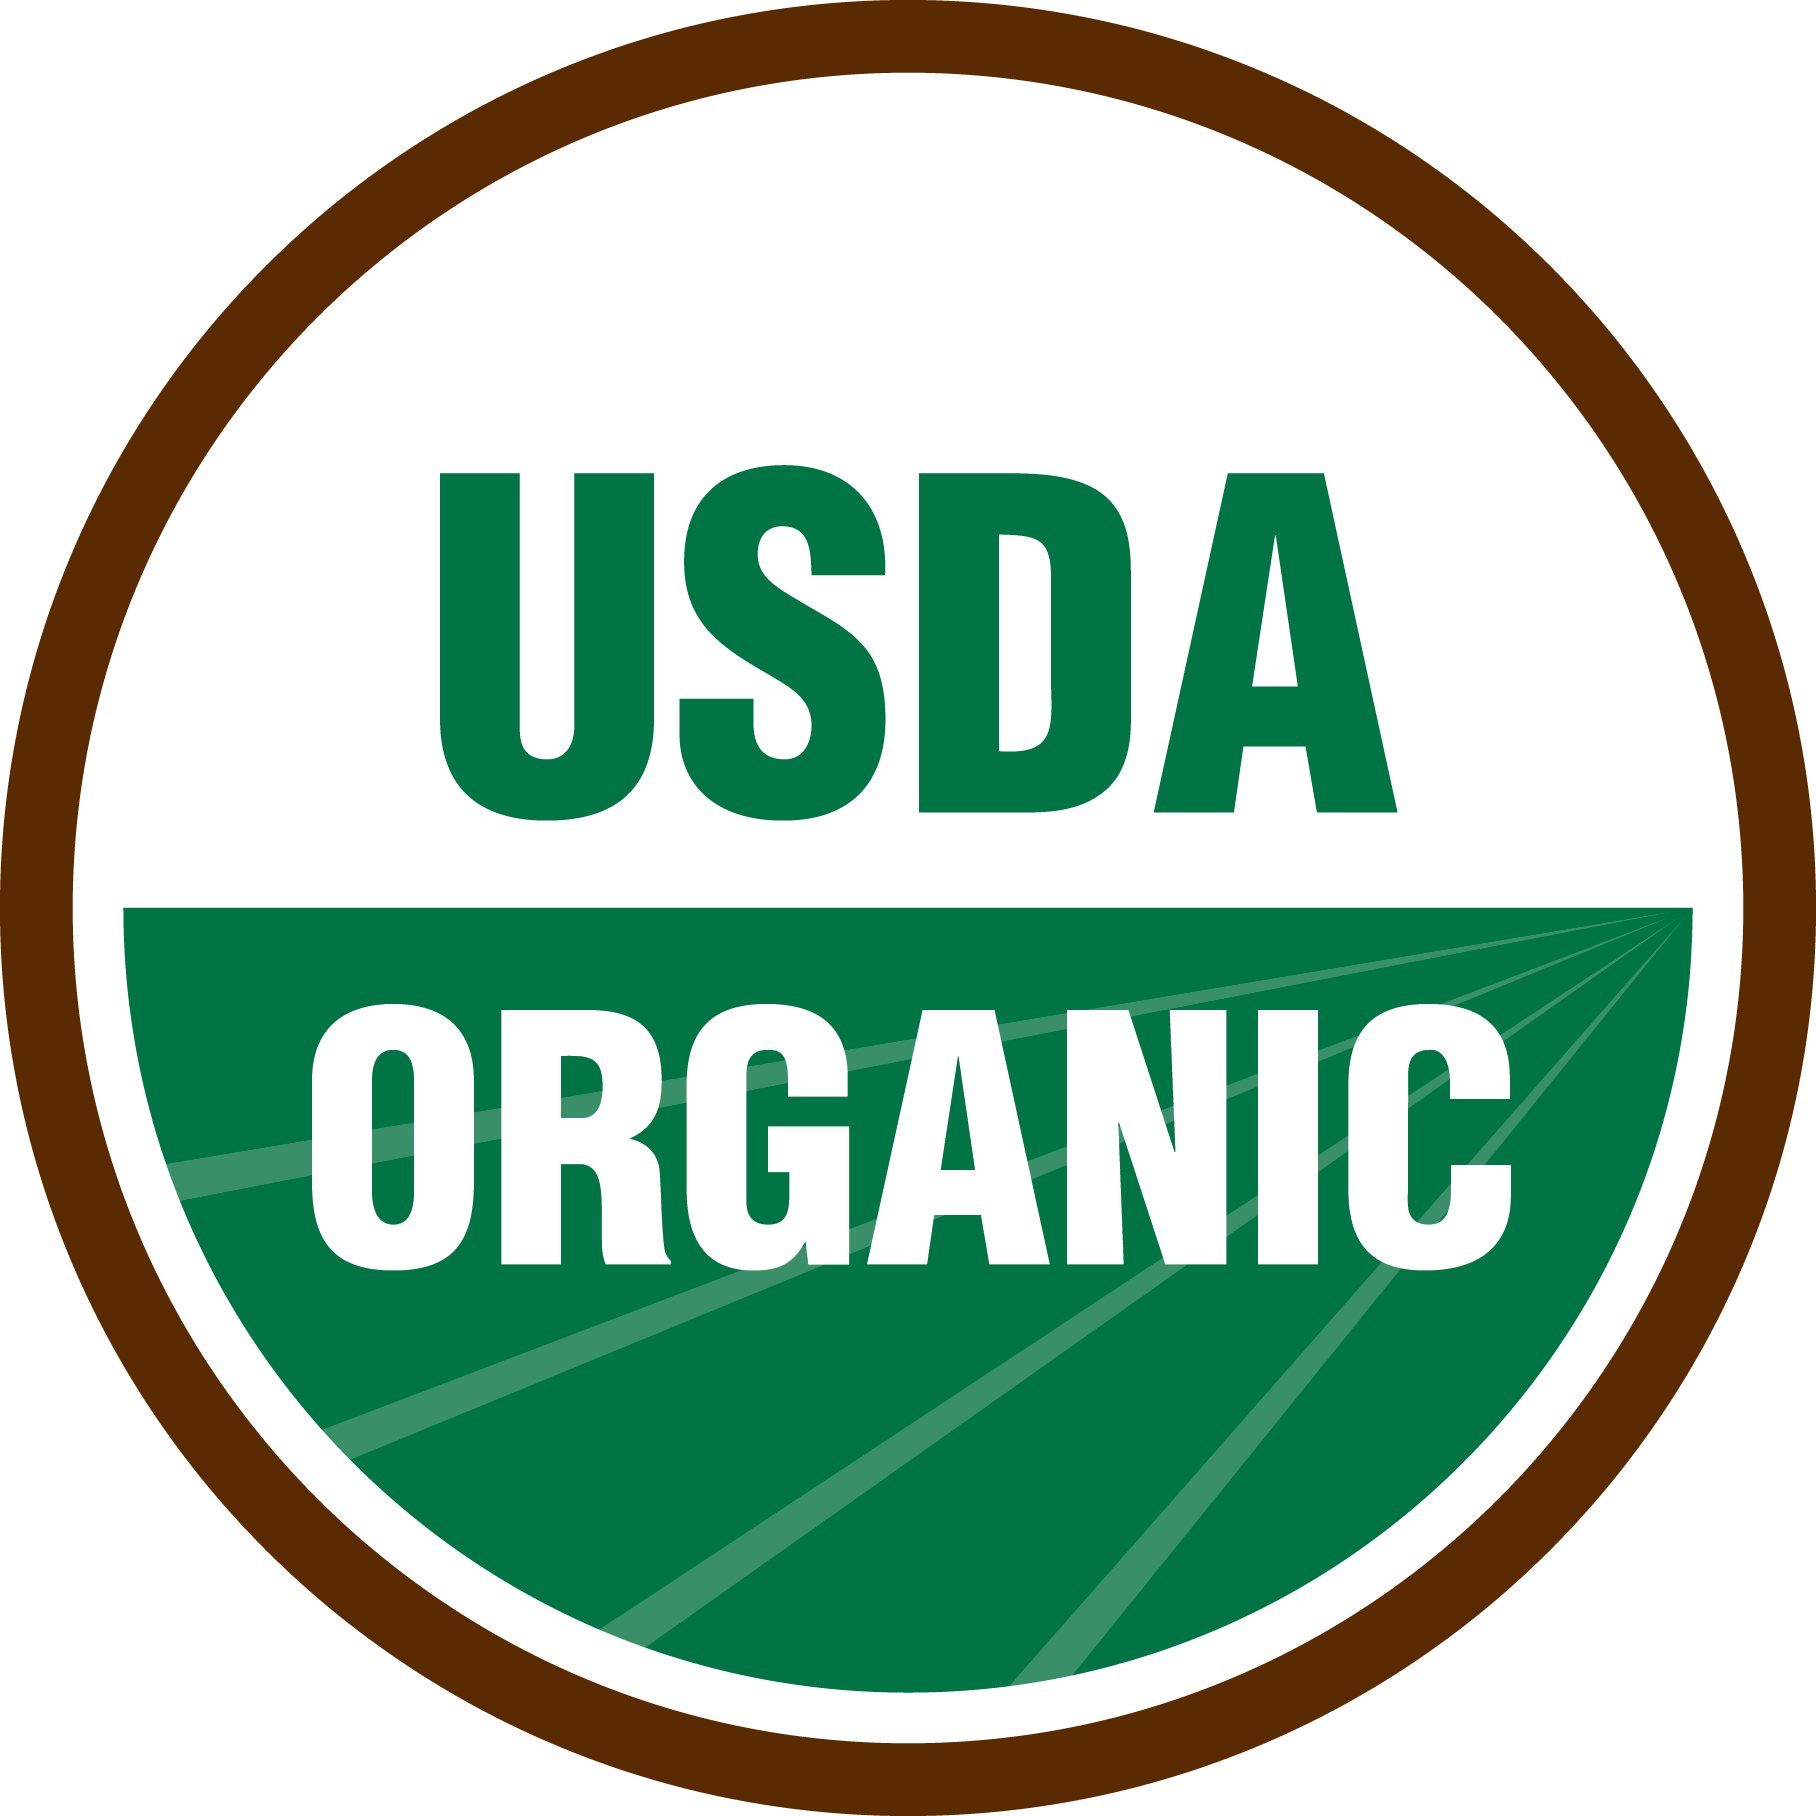 The organic seal agricultural. Stamp clipart certification